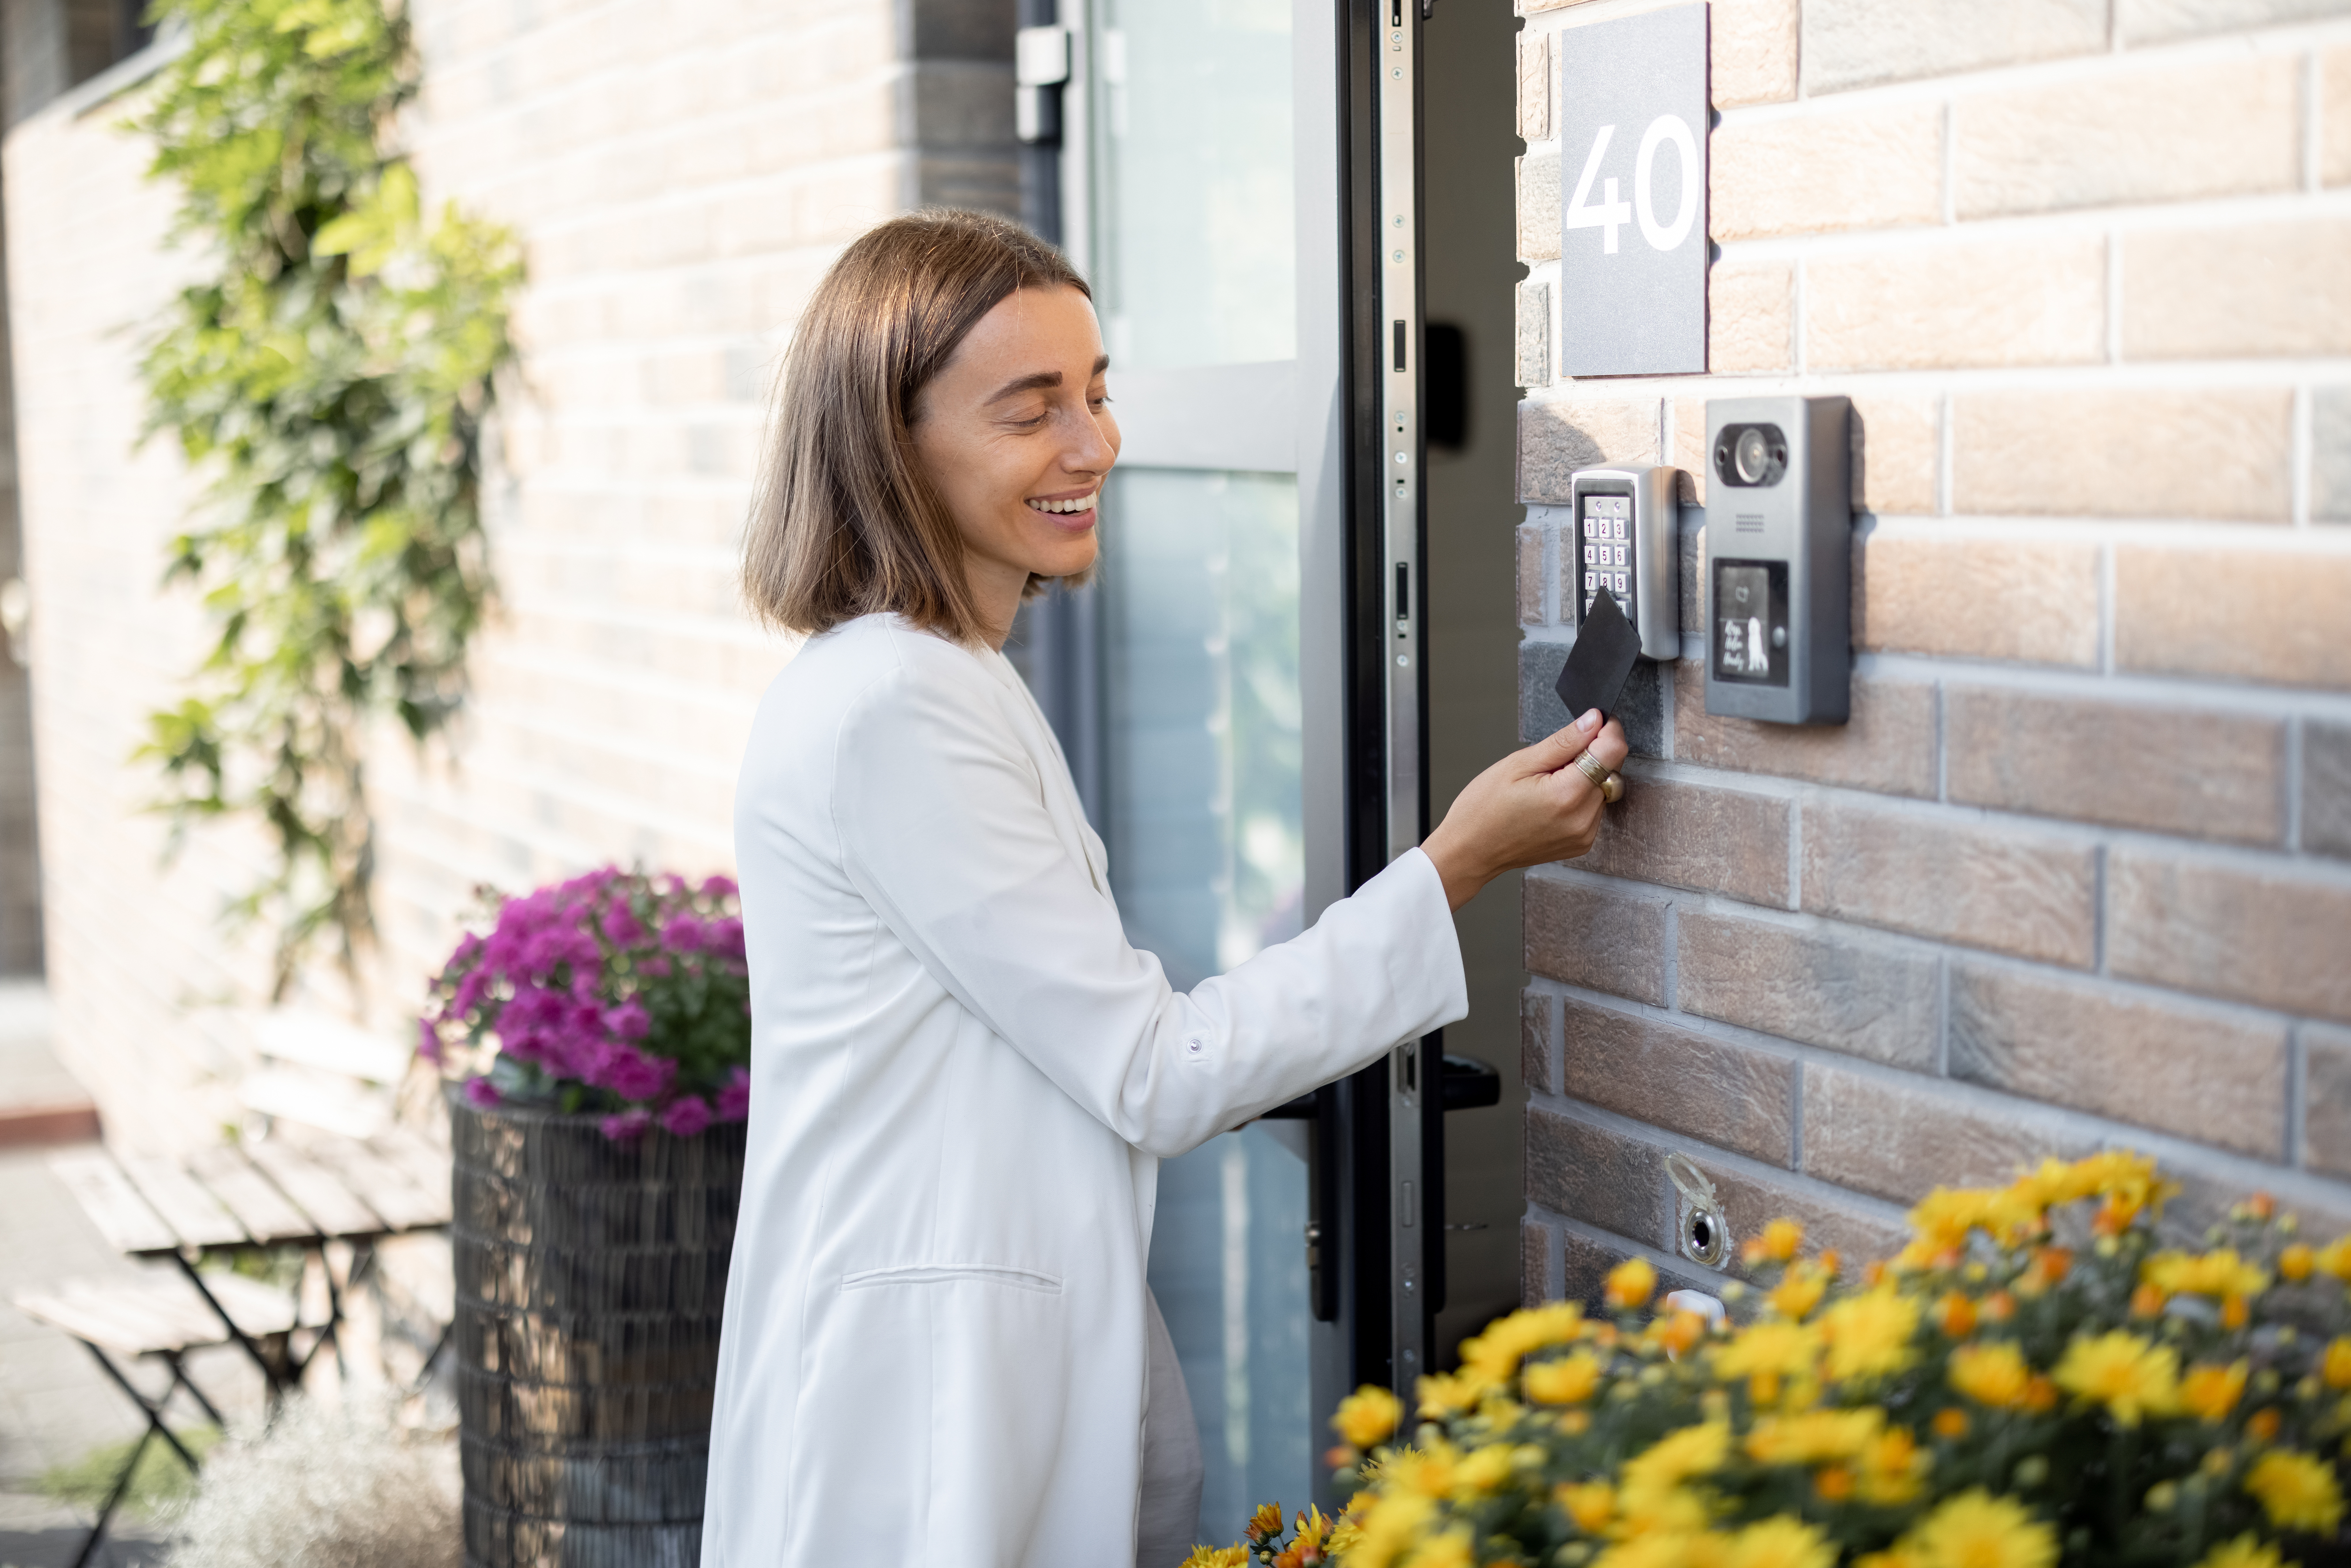 A tenant enters their home by using a keycard on a security electronic lock.